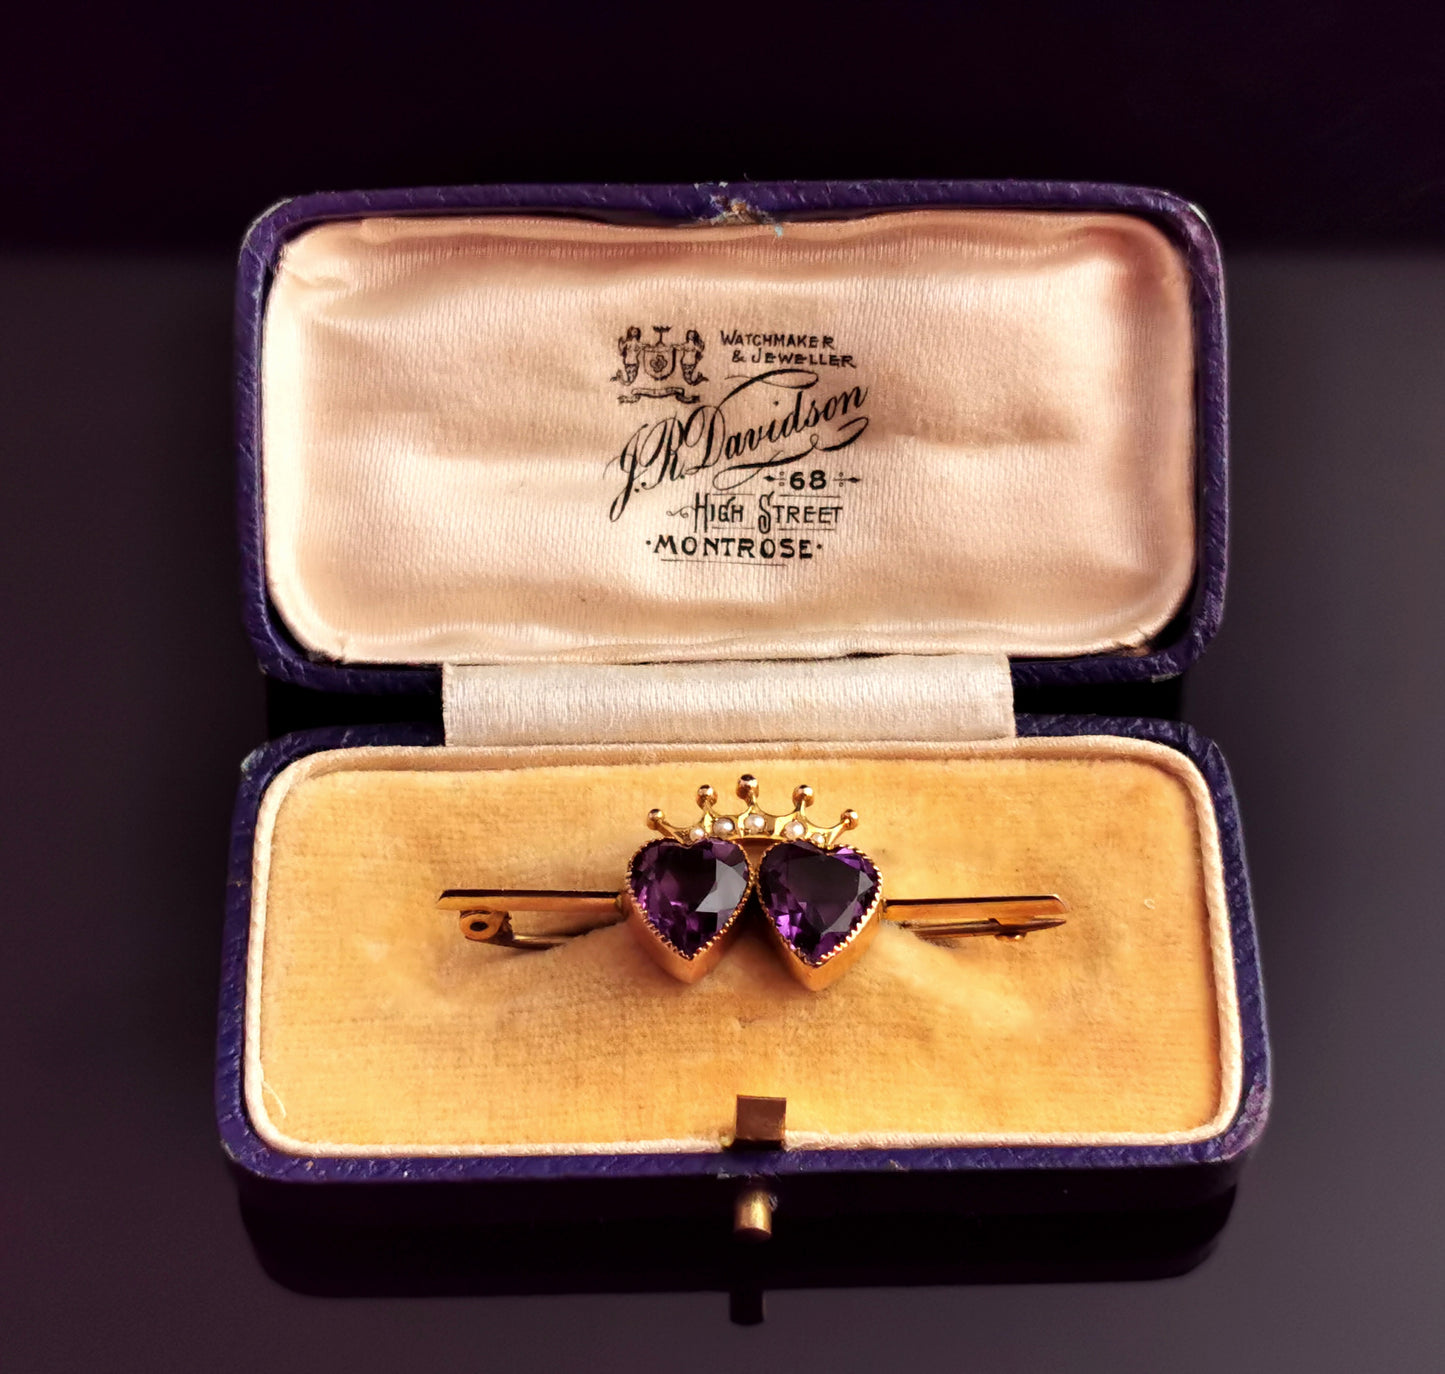 Antique Amethyst Crowned hearts brooch, 9ct gold, Seed pearl, Boxed